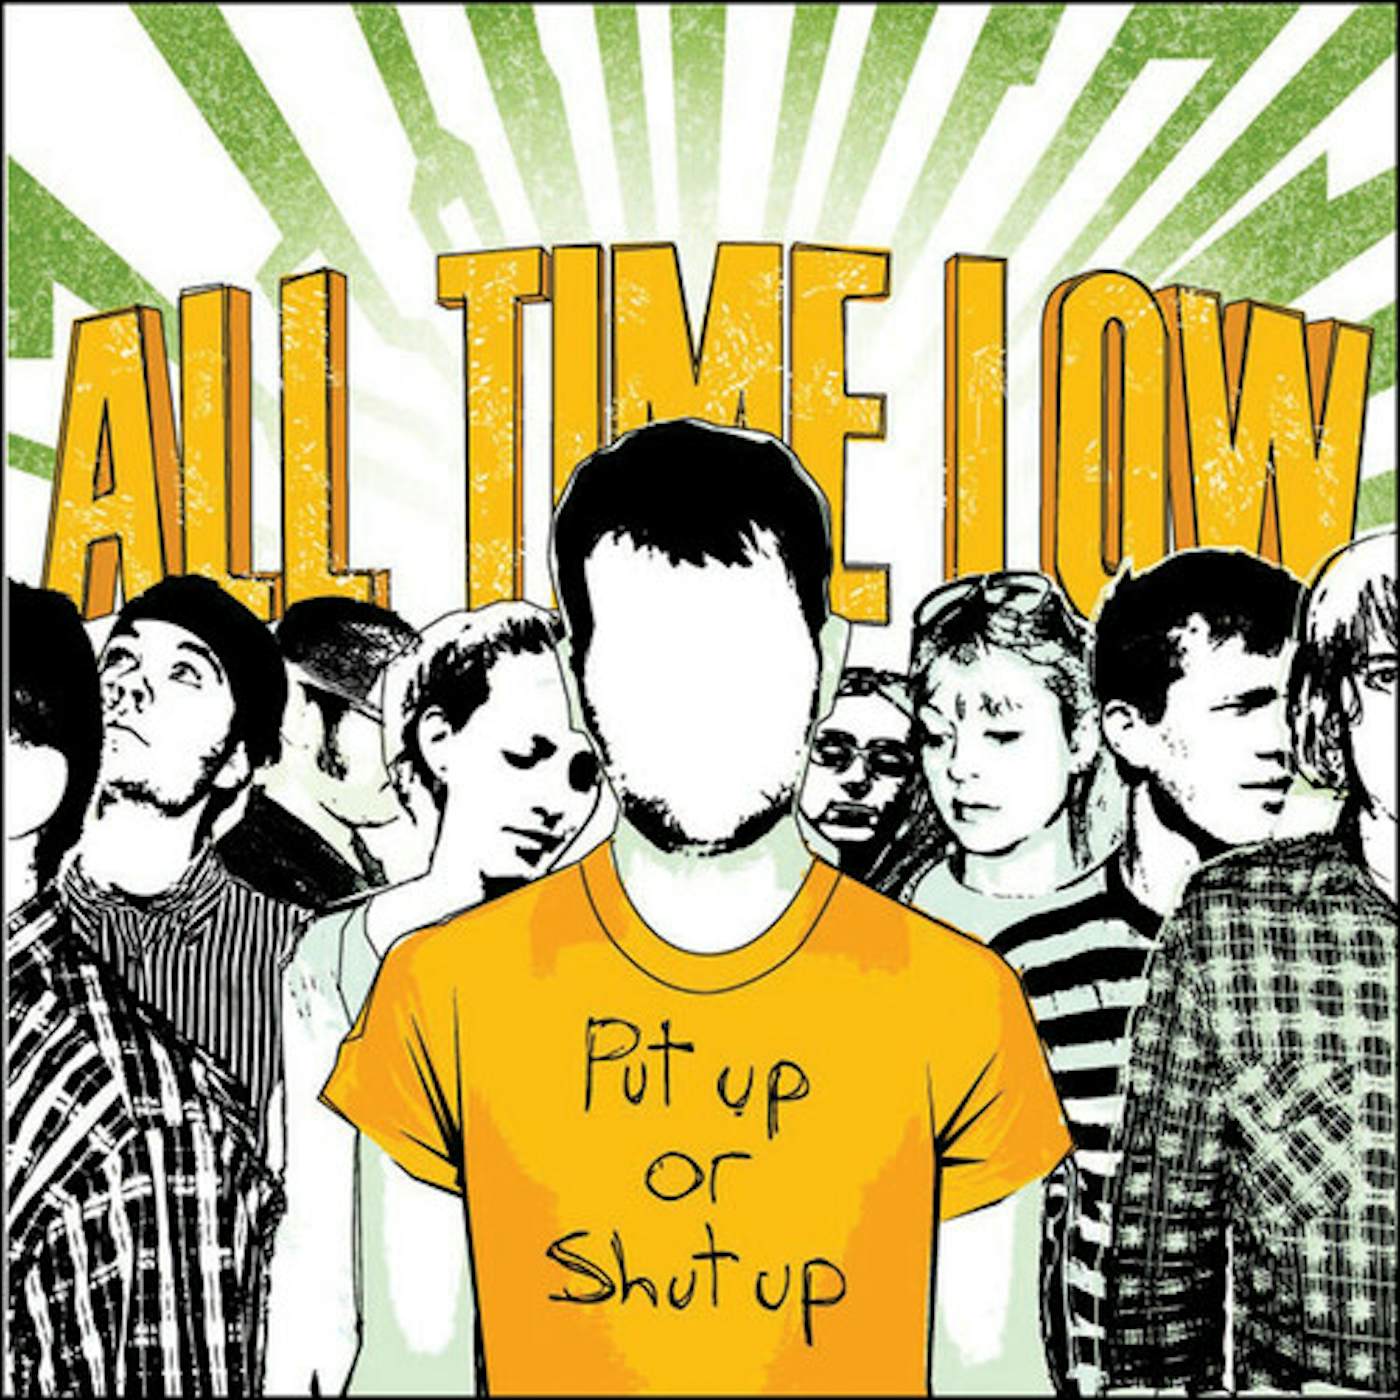 All Time Low Put Up Or Shut Up (Yellow) Vinyl Record